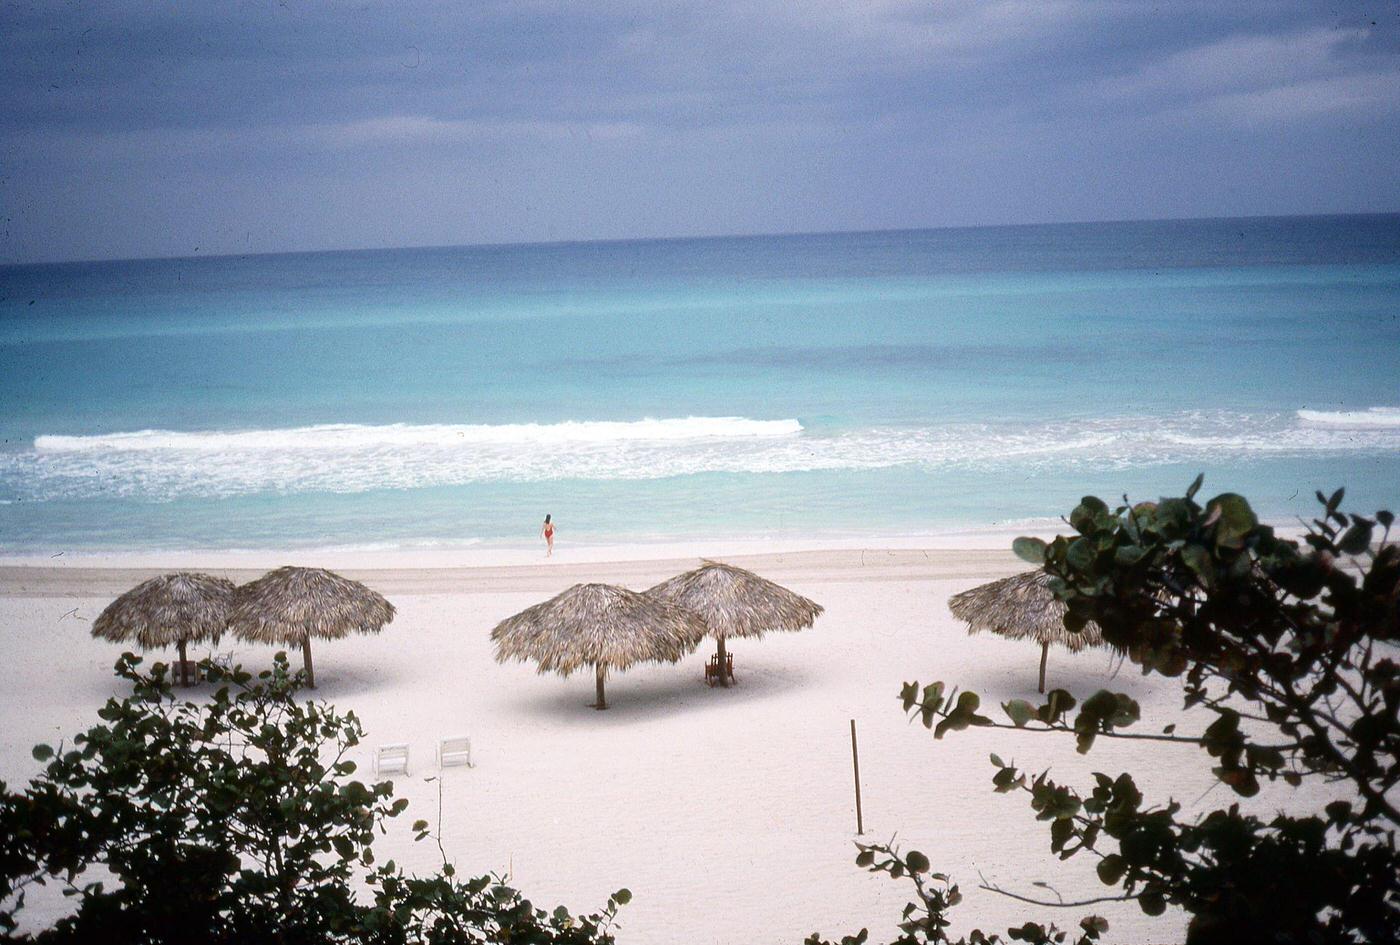 Deserted beach at an unidentified resort where one woman in a red swimsuit walks into the surf, Varadero, Cuba, January 1983.